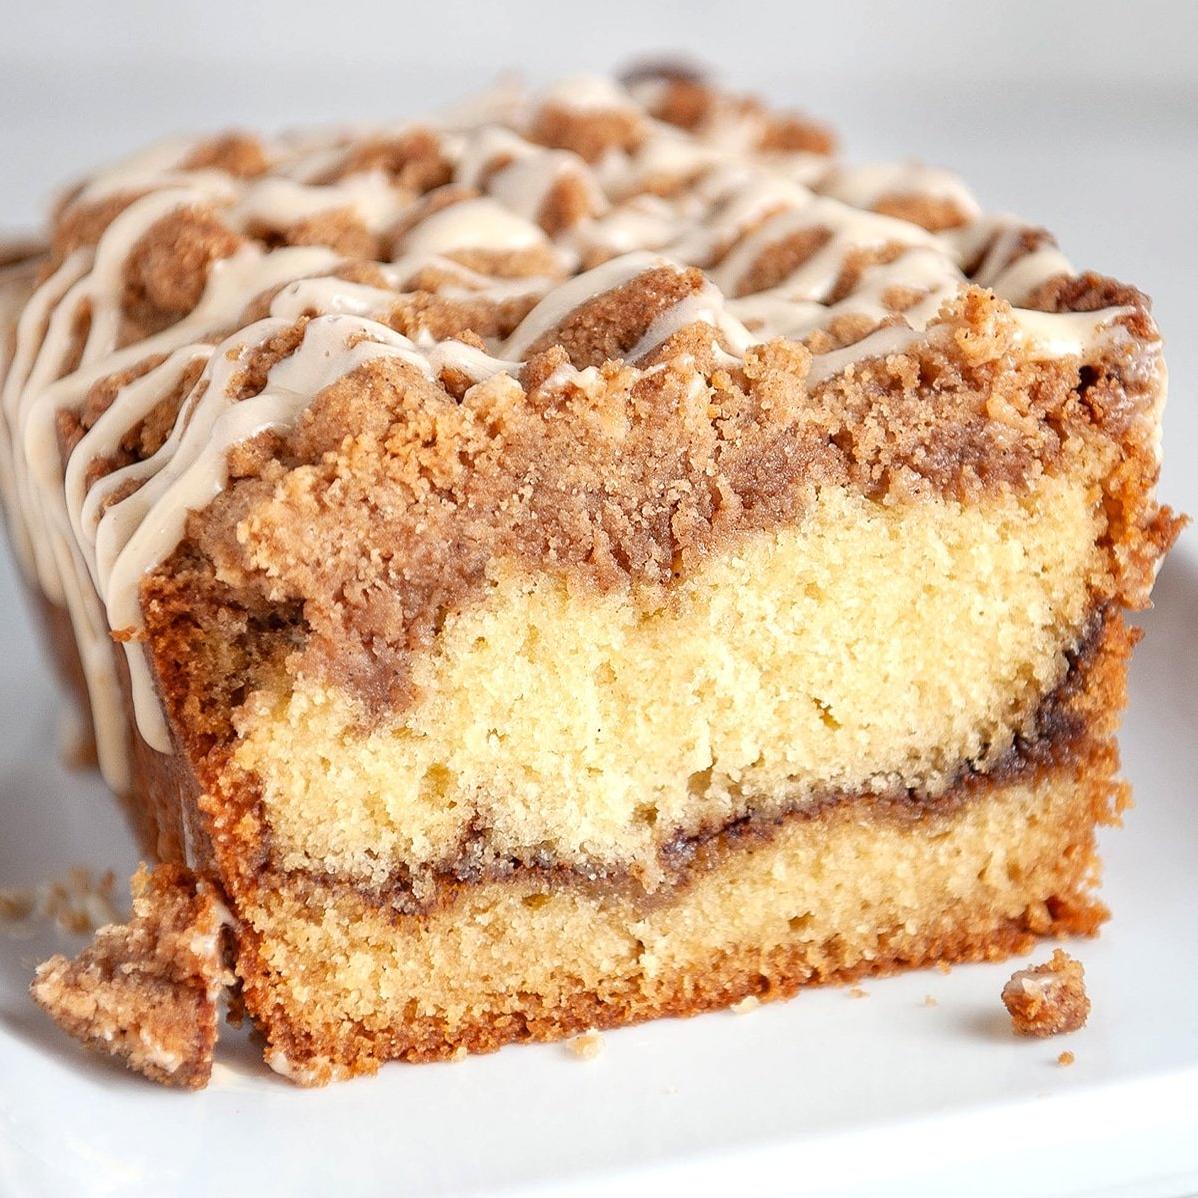  This coffee cake is moist, buttery, and oh so delicious.